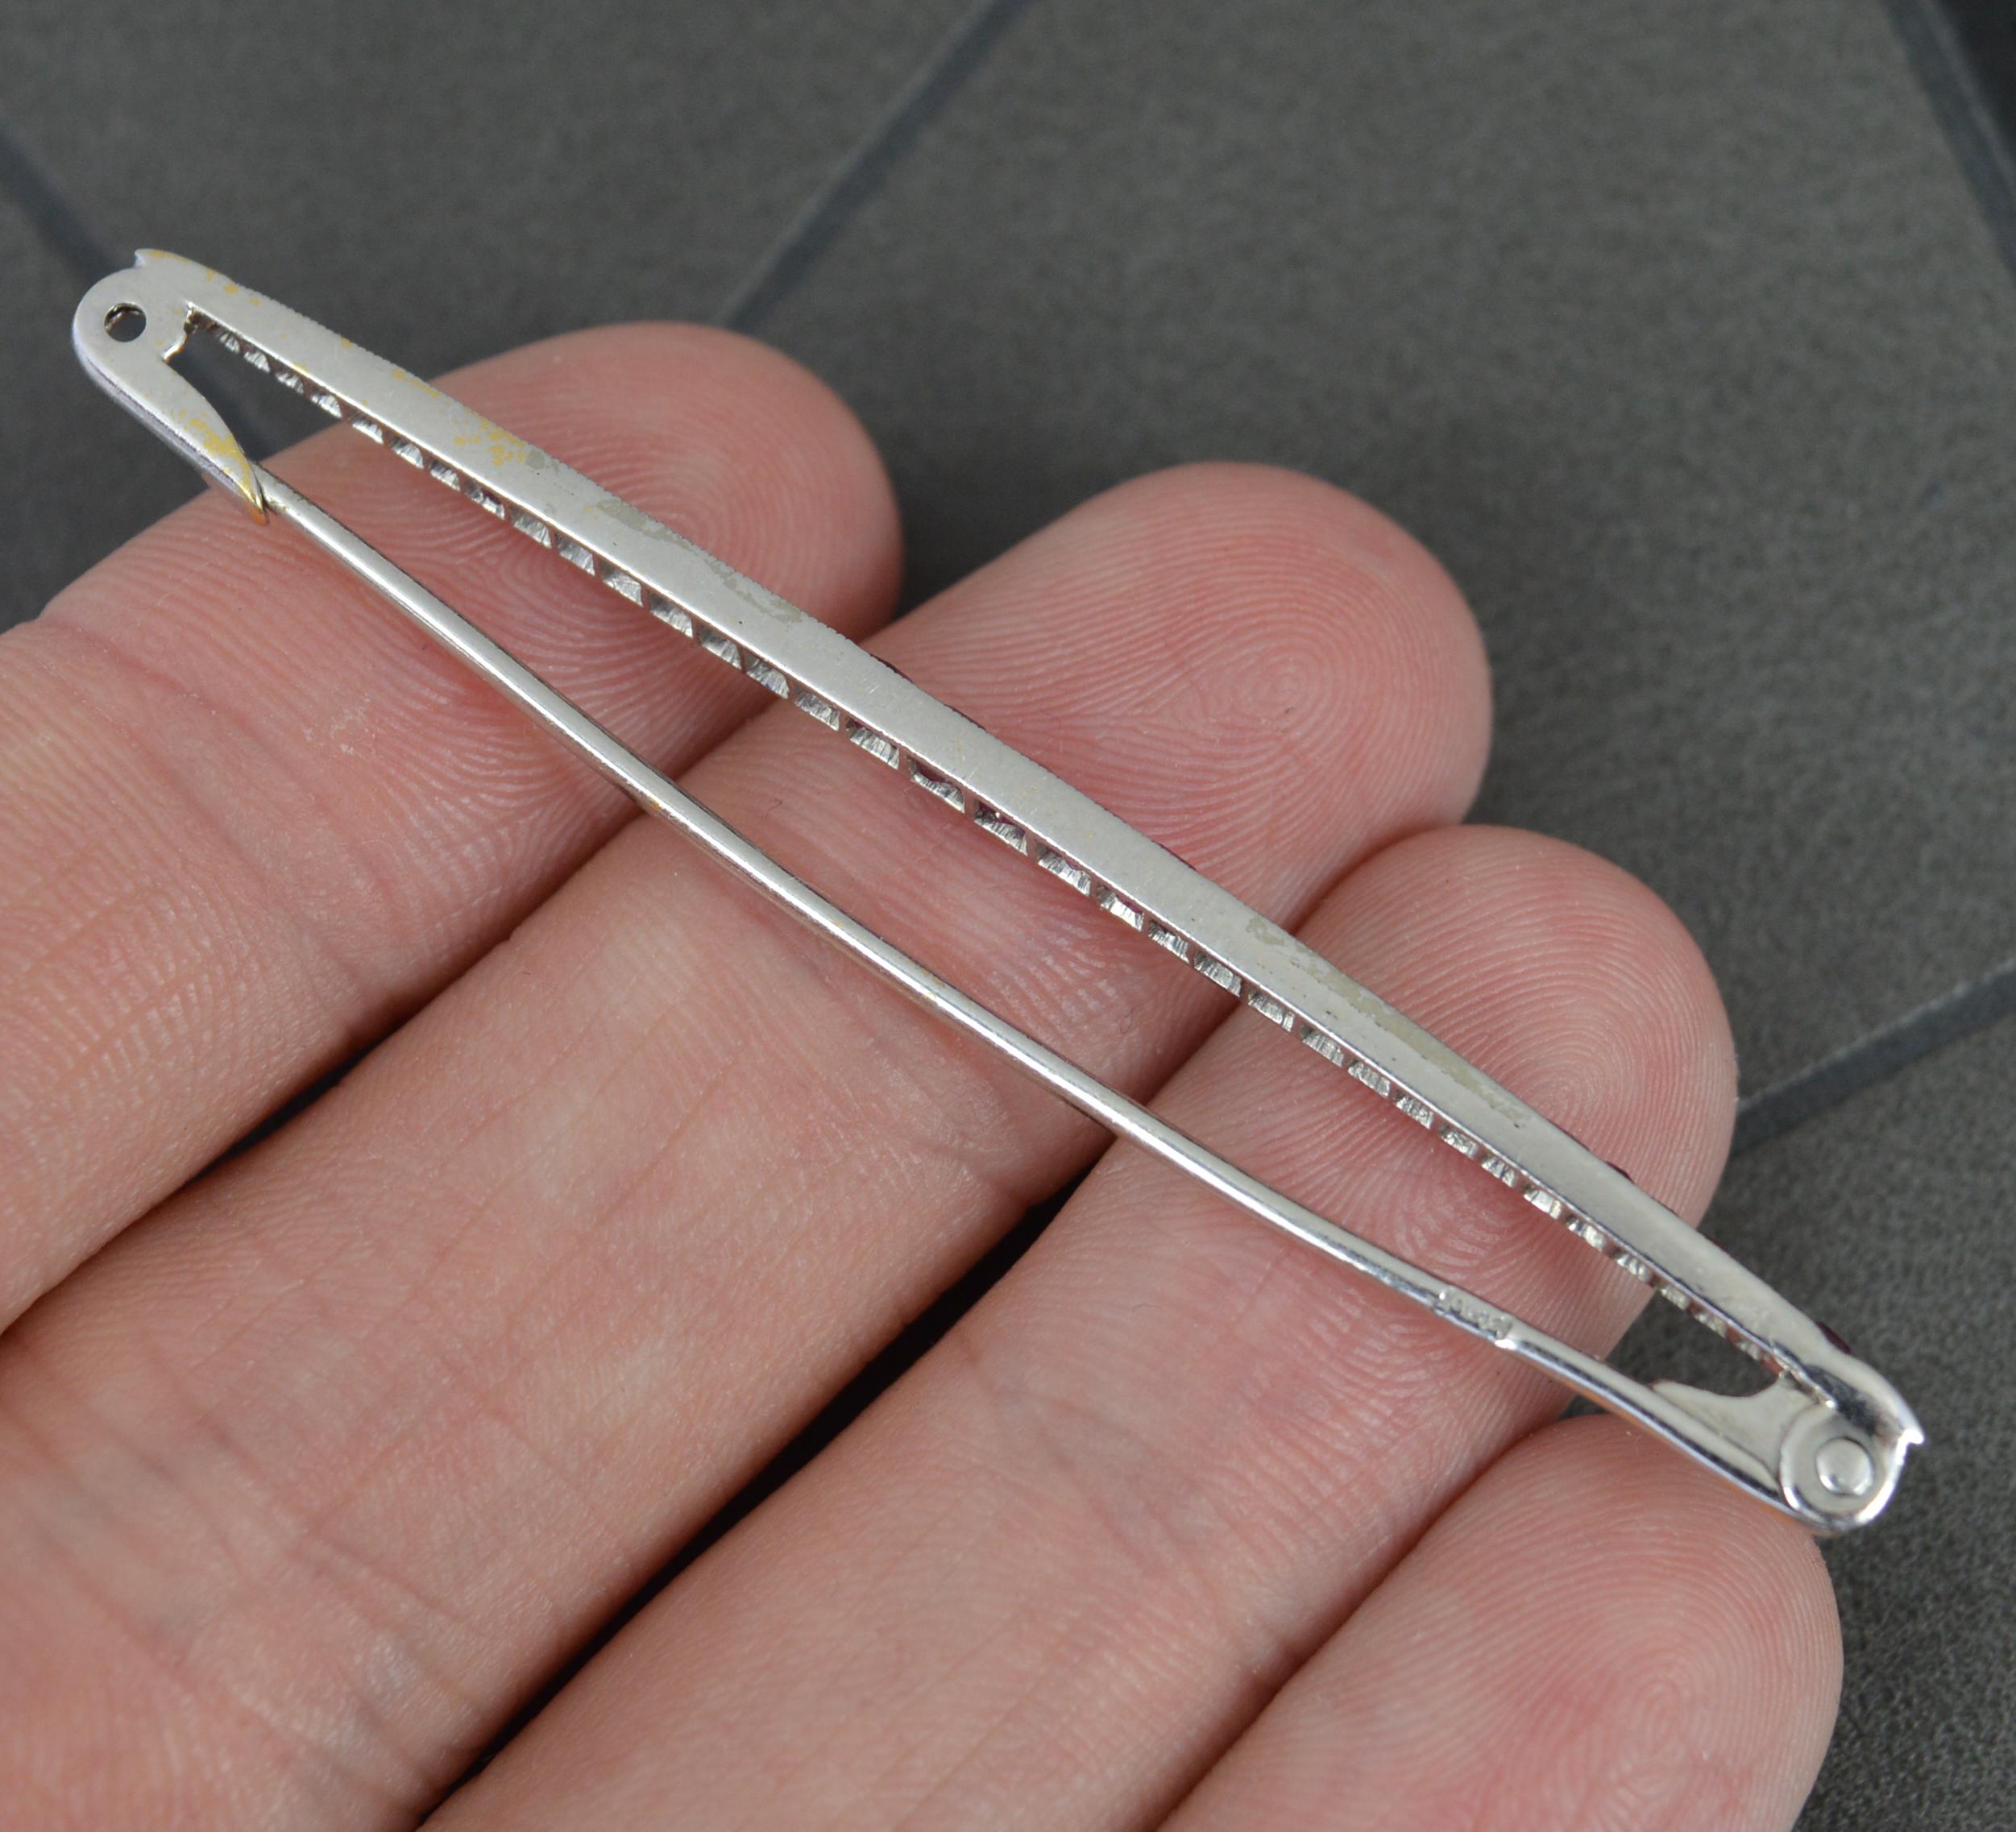 A stunning Art Deco period bar brooch. Circa 1930.
Solid 18 carat white gold example with a fine platinum setting.
Designed with alternating sections of princess cut ruby stones and rose cut diamonds.

CONDITION ; Very good. Securely set stones.